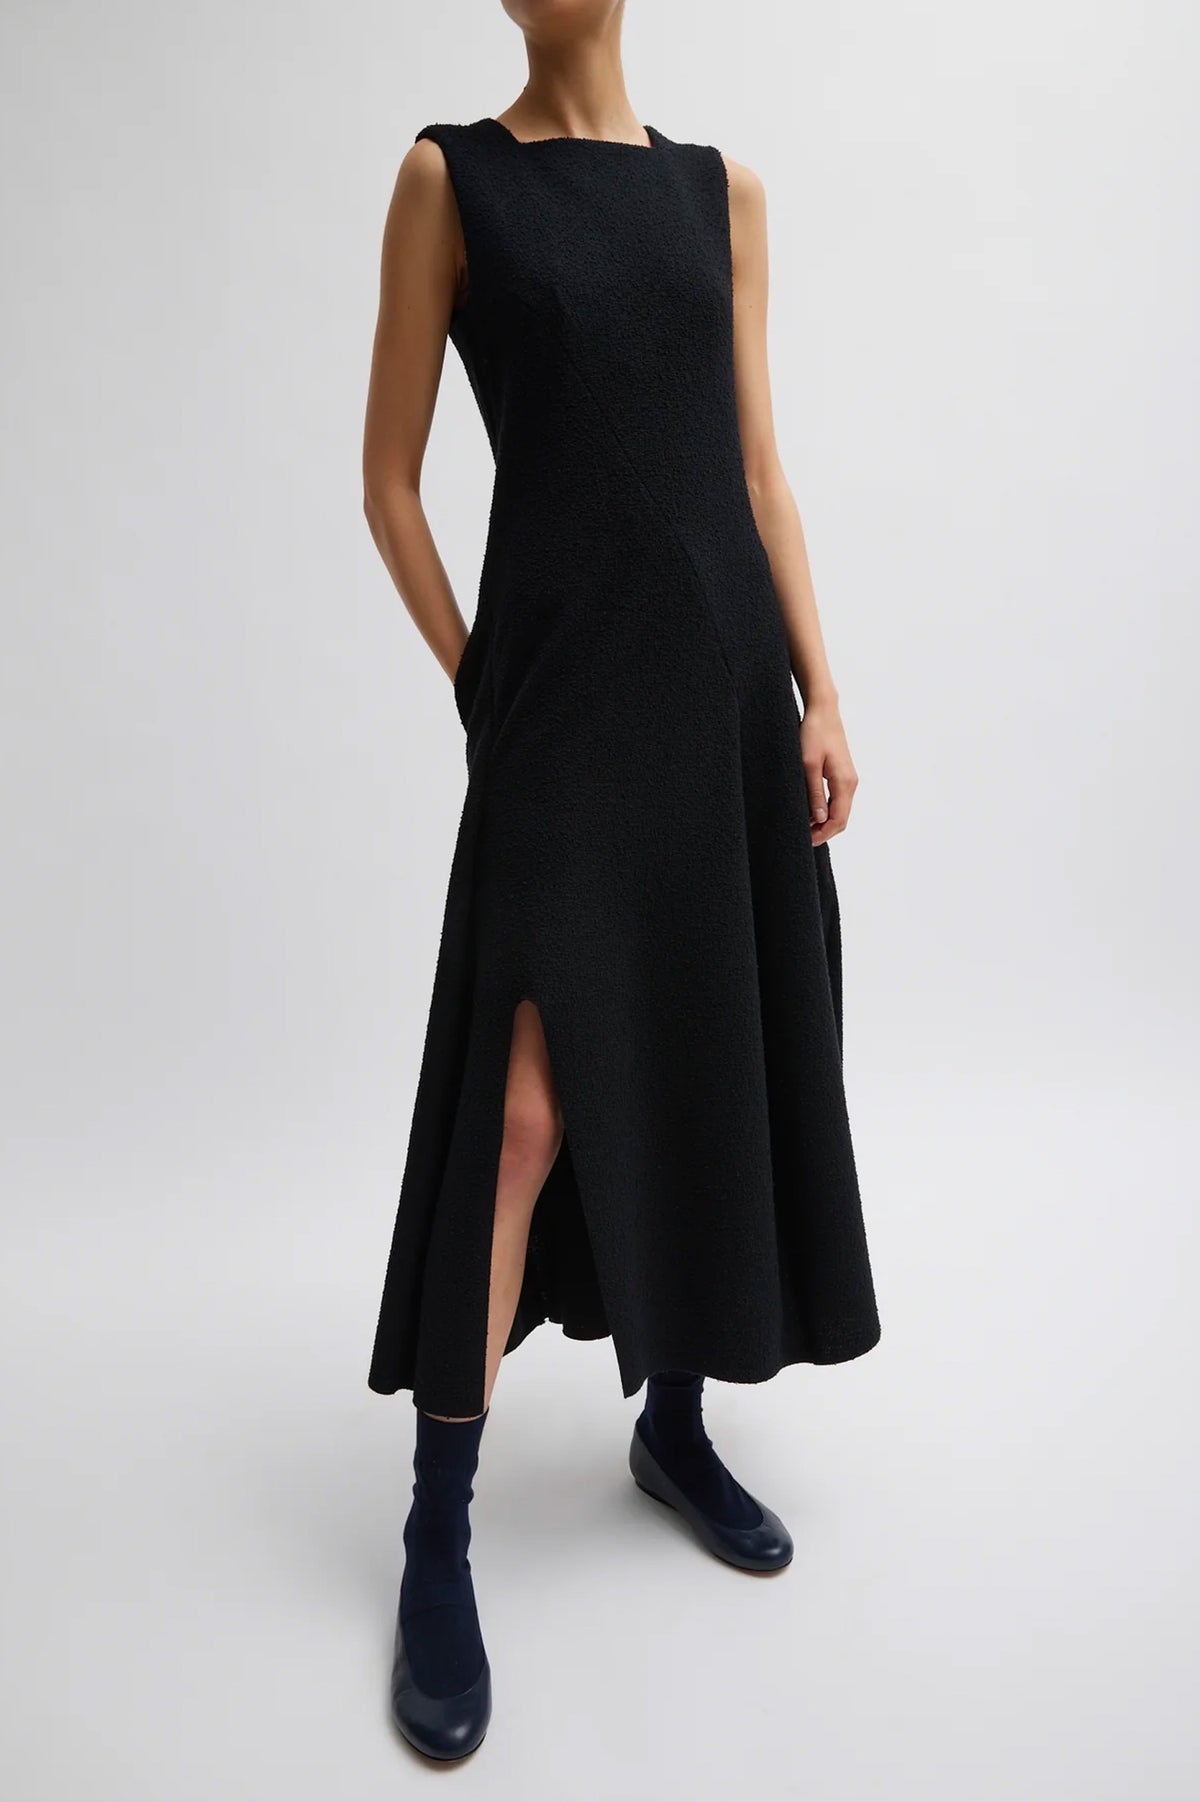 Boucle Knit Sculpted Dress in Black